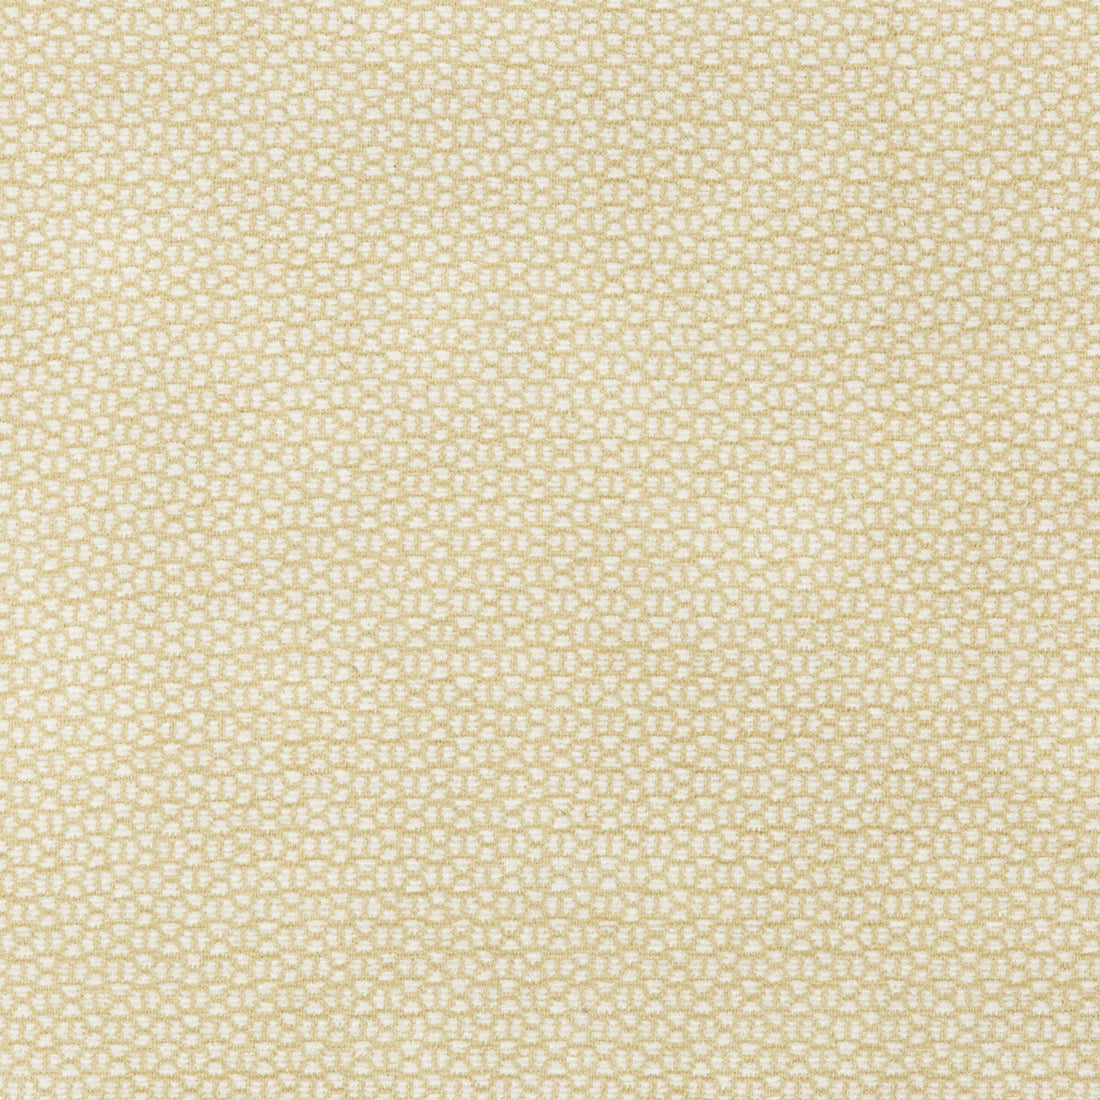 Marolay Texture fabric in almond color - pattern 8019144.16.0 - by Brunschwig &amp; Fils in the Chambery Textures II collection